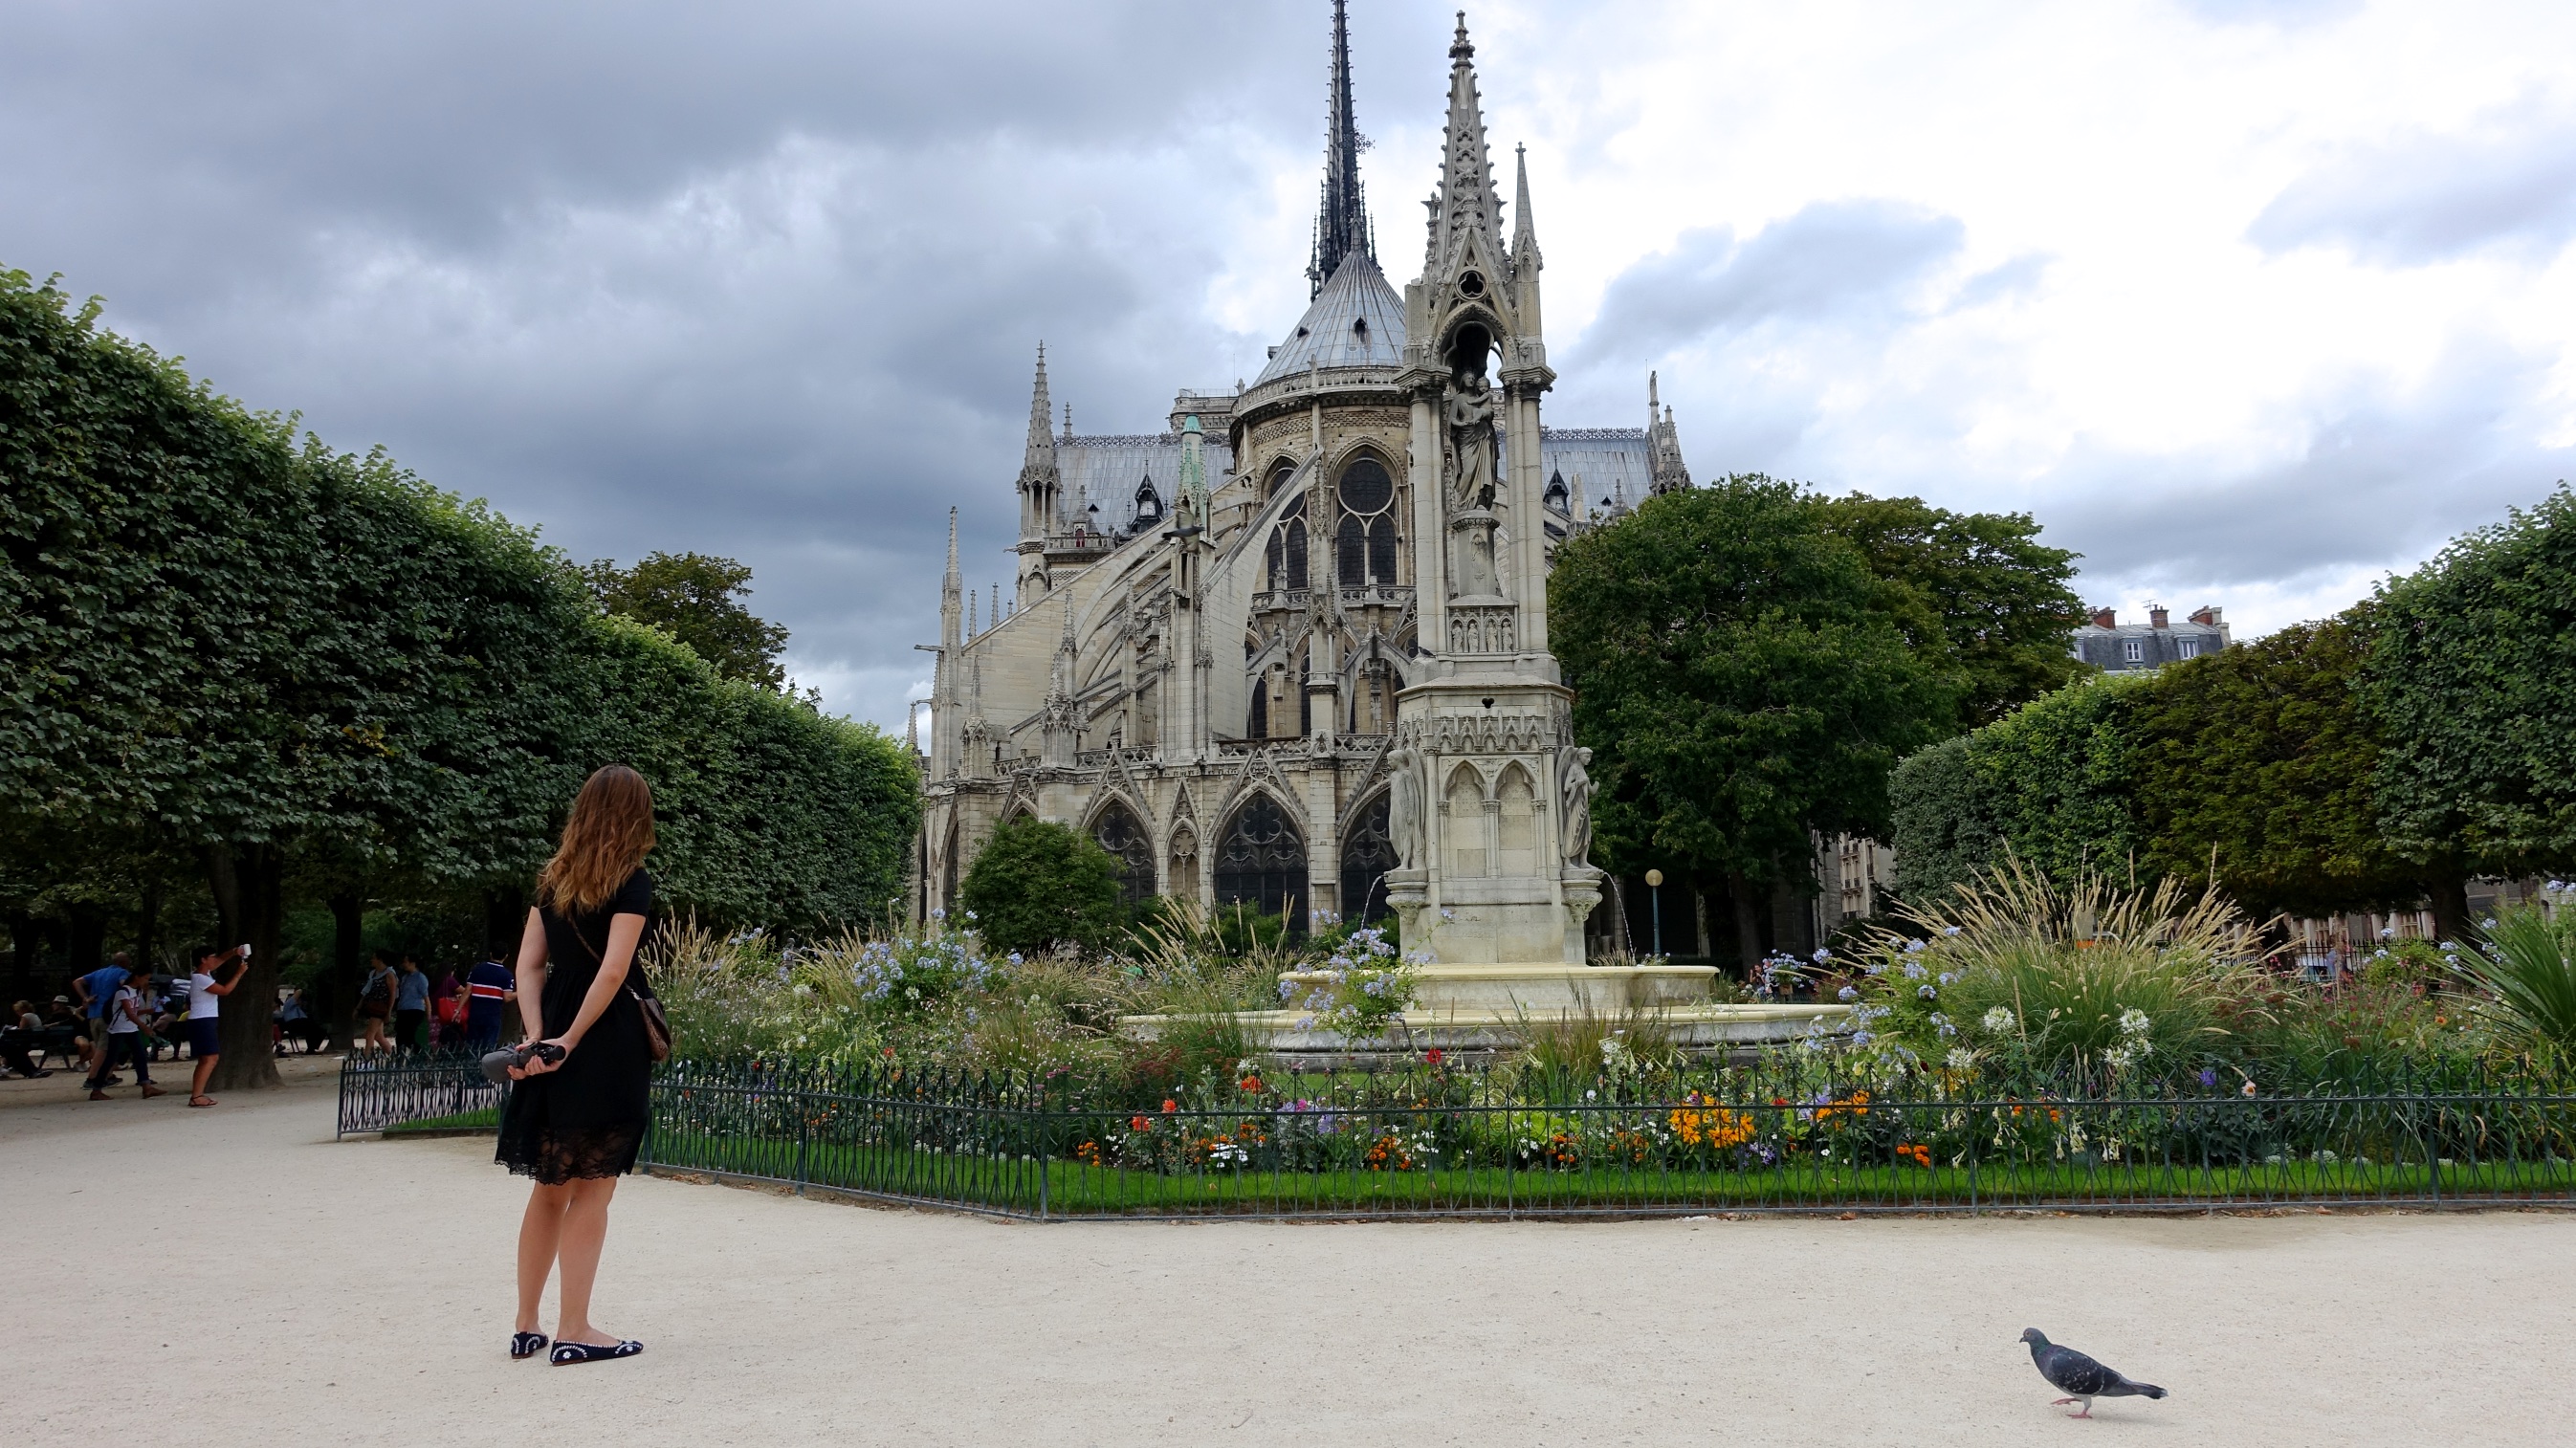 Woman standing in the gardens near Notre Dame in Paris, France.